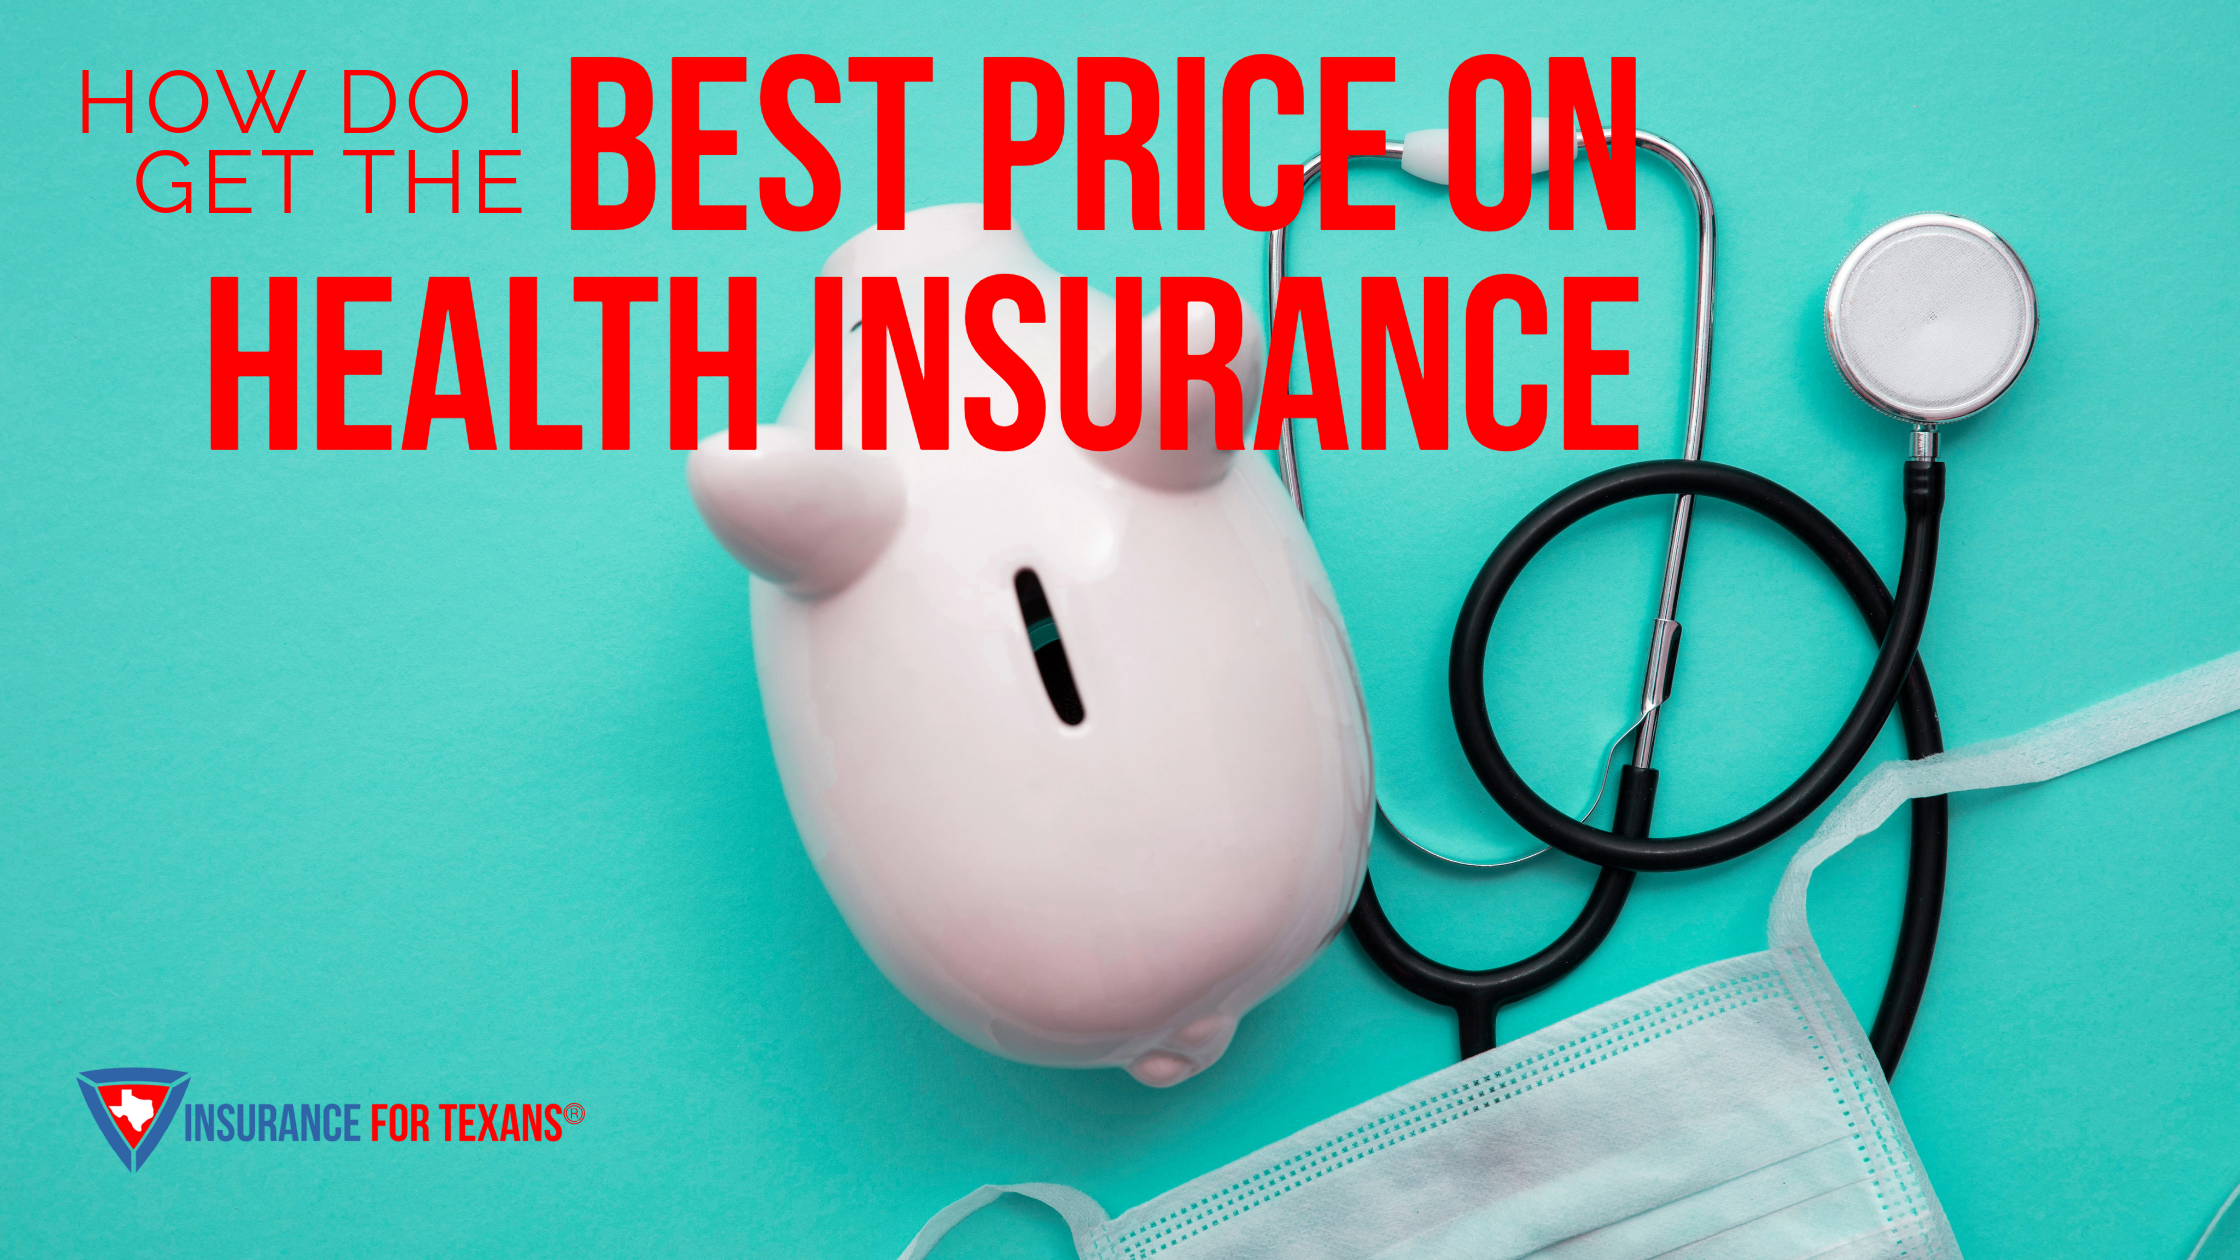 How Do I Get The Best Price On Health Insurance In Texas?